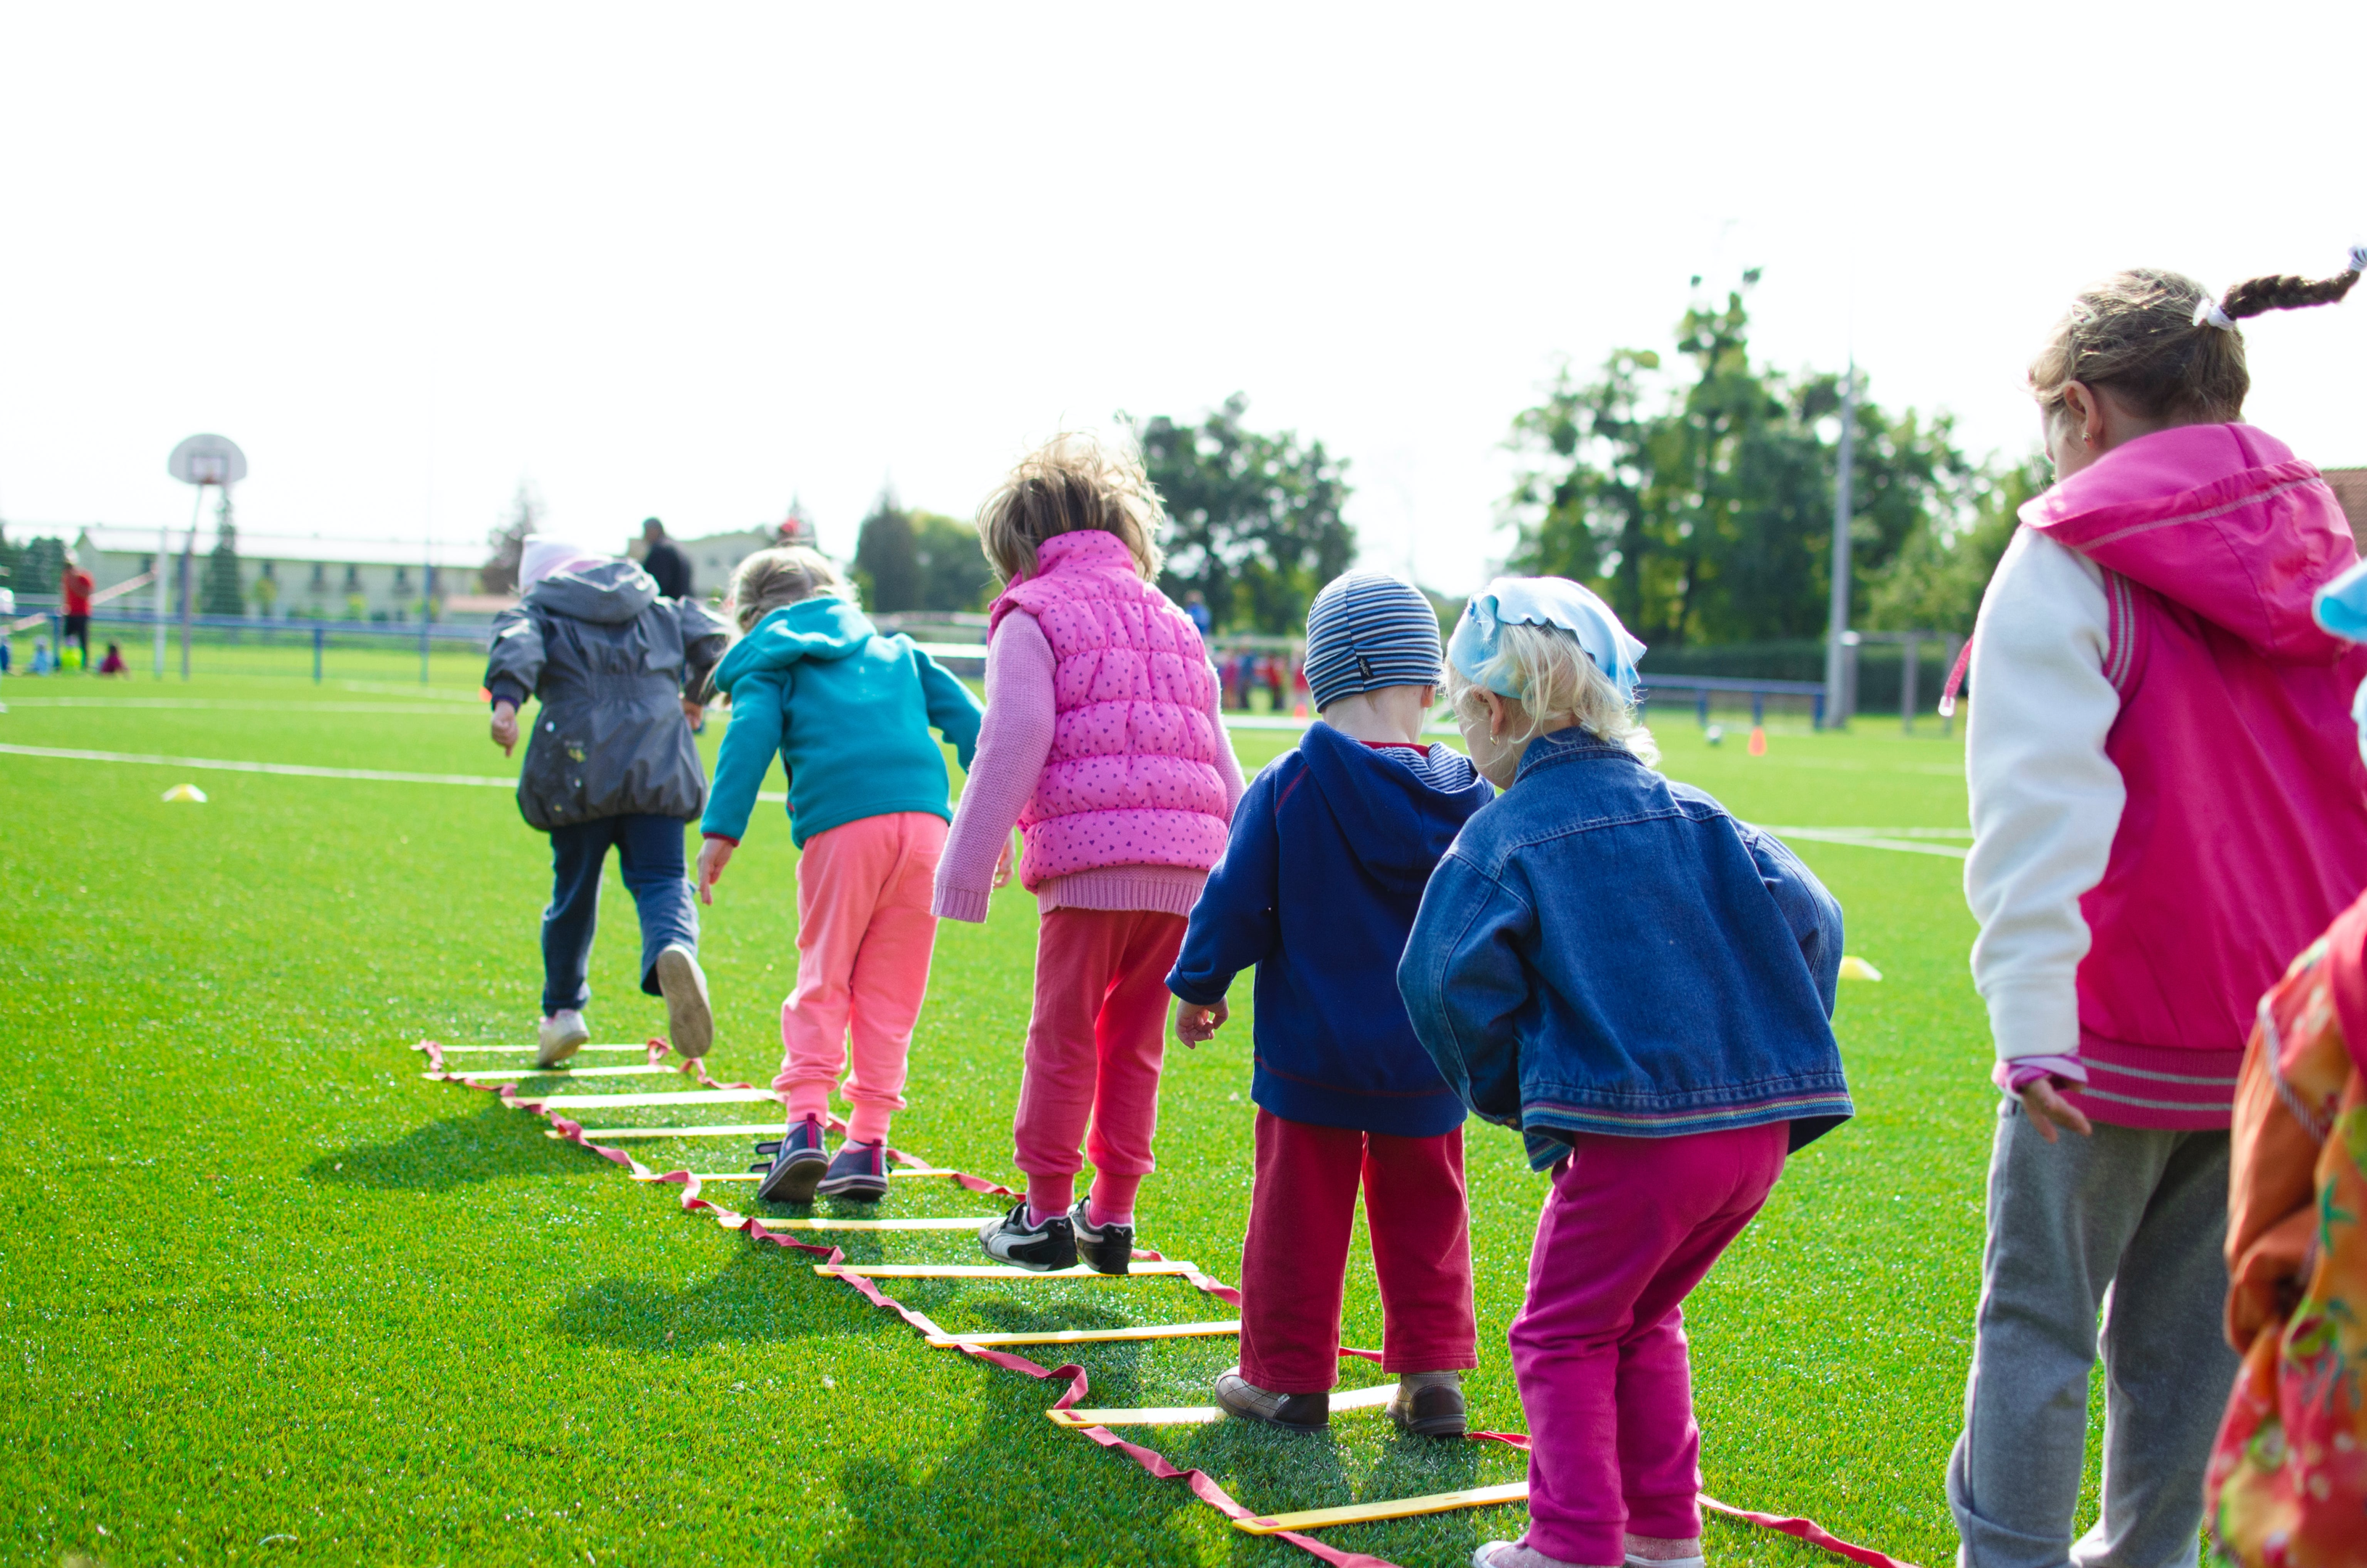 Children at school playing outdoors.